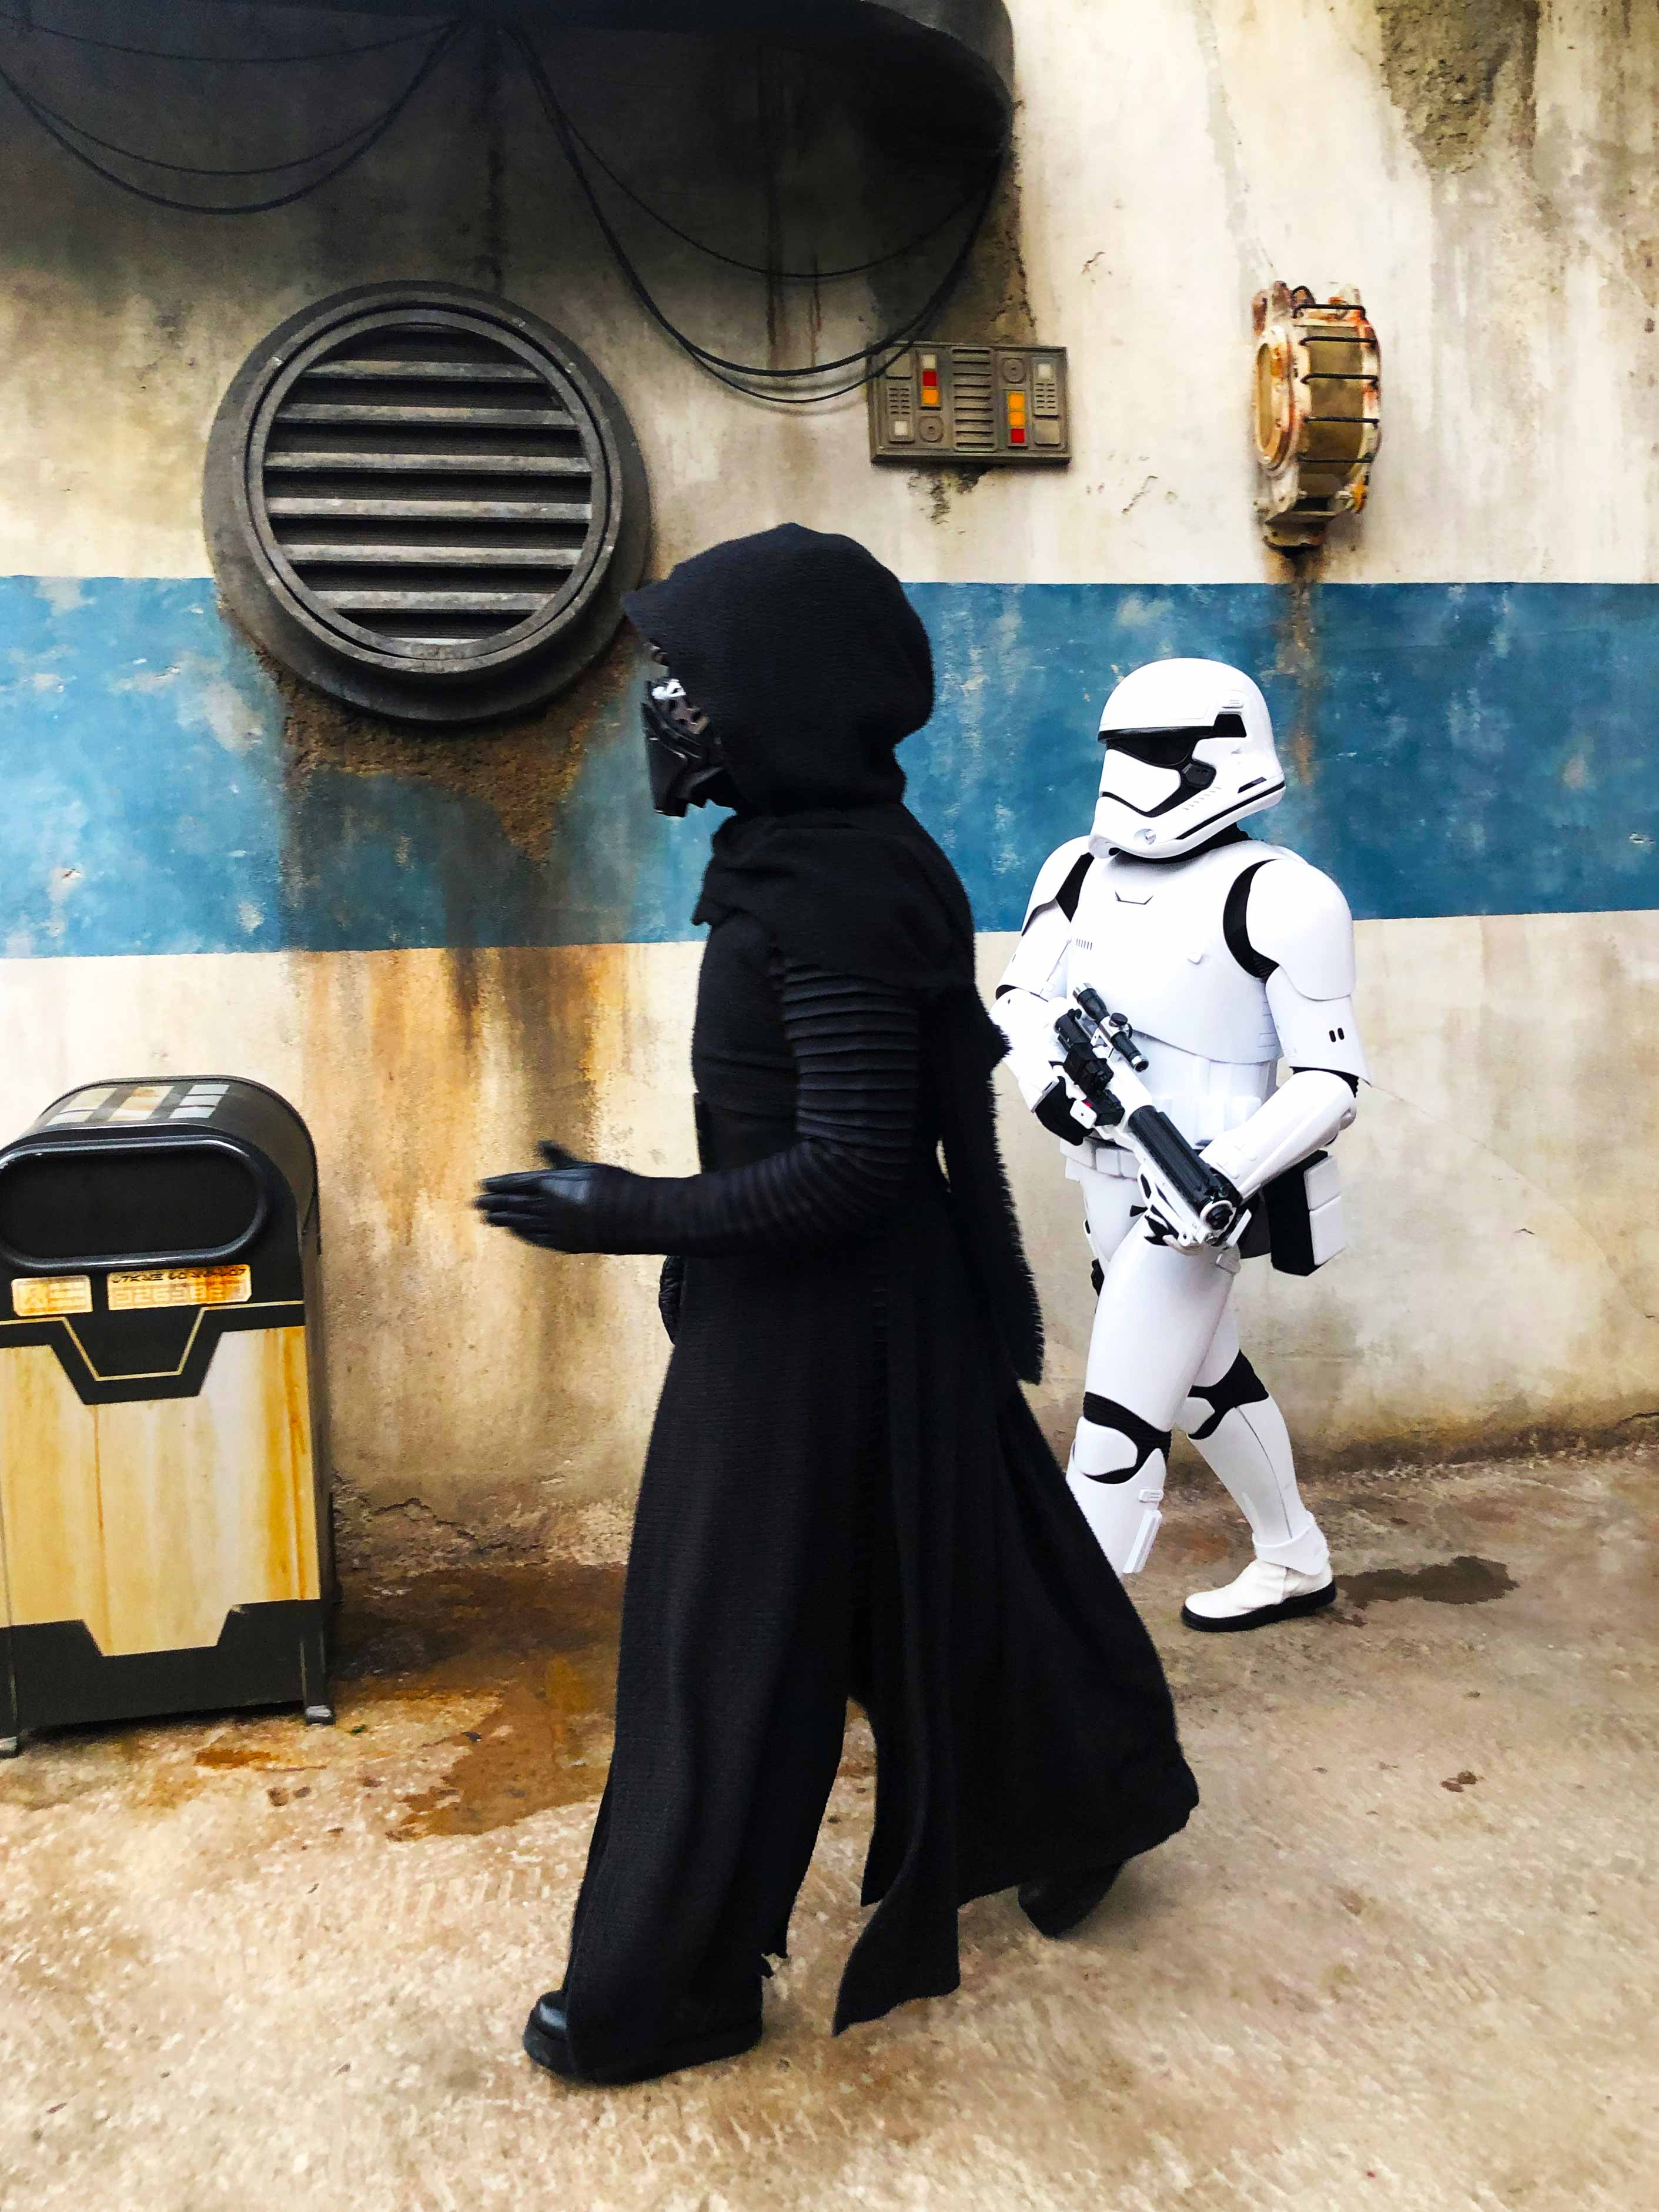 Daytime shot. Side view of Kylo Ren in full gear as he walks through Batuu with a Stormtrooper (to his right), armed with a trooper gun. Star Wars: Galaxy's Edge at Disney's Hollywood Studios. Lake Buena Vista, Florida.